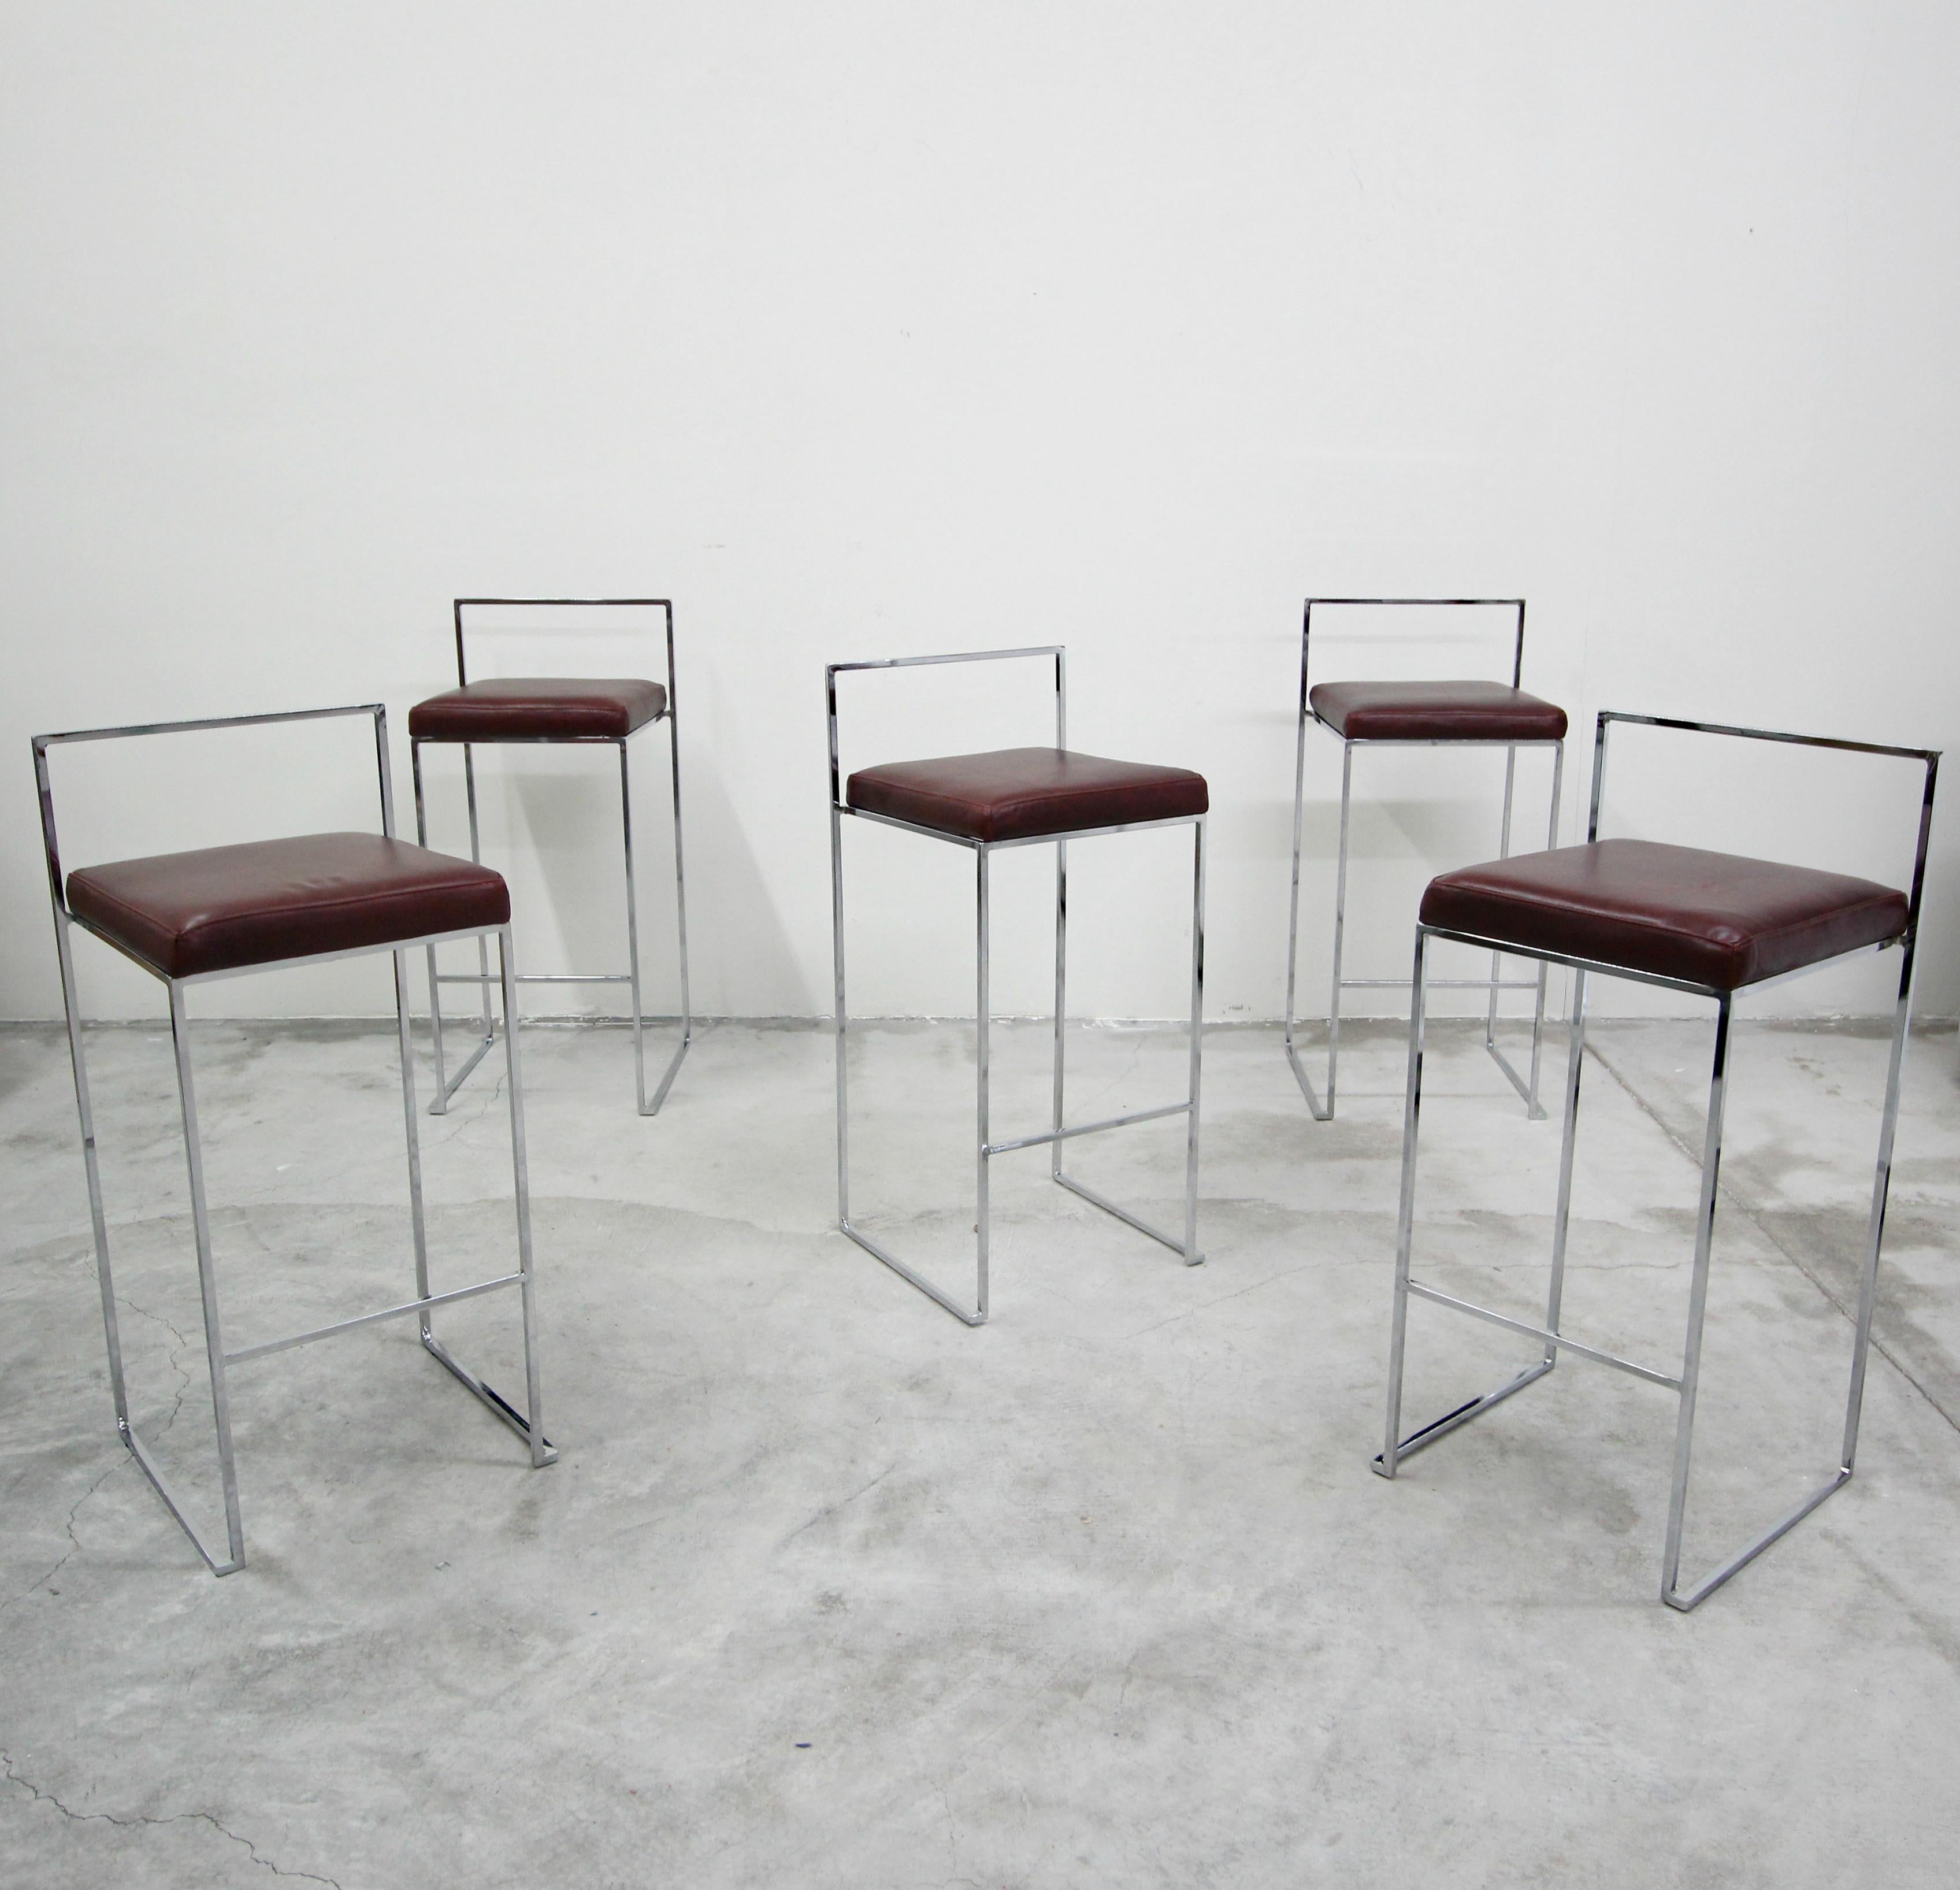 Set of five chrome midcentury, bar height stools. Stools have simple, thin, clean line chrome frames with all new butter soft maroon leather upholstery. They are in near mint condition and ready for their new home.

These stools are vintage not